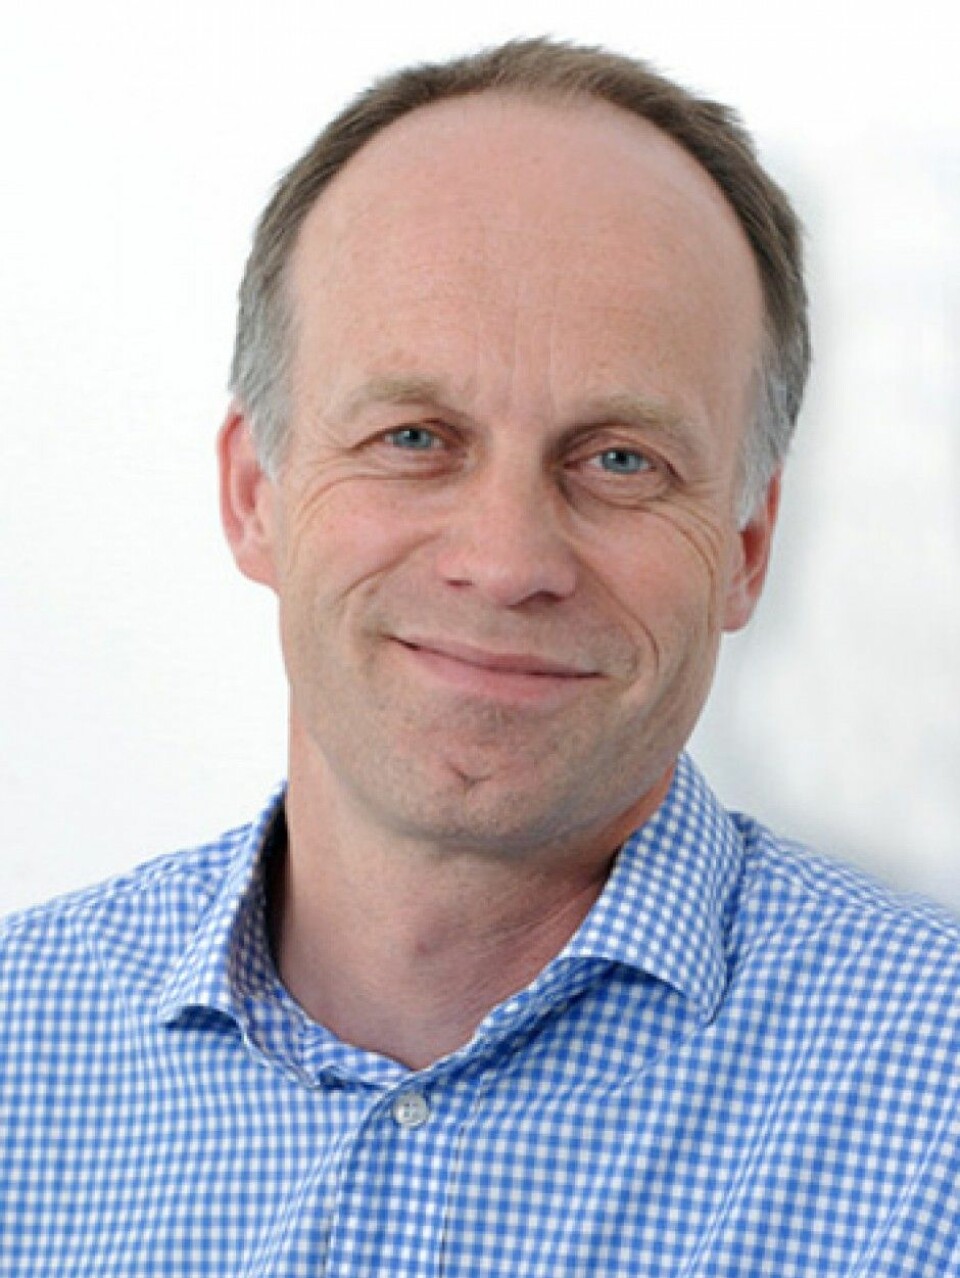 Ludvig Sollid is a professor at the University of Oslo. He has been studying the autoimmune disorder celiac disease for many years.